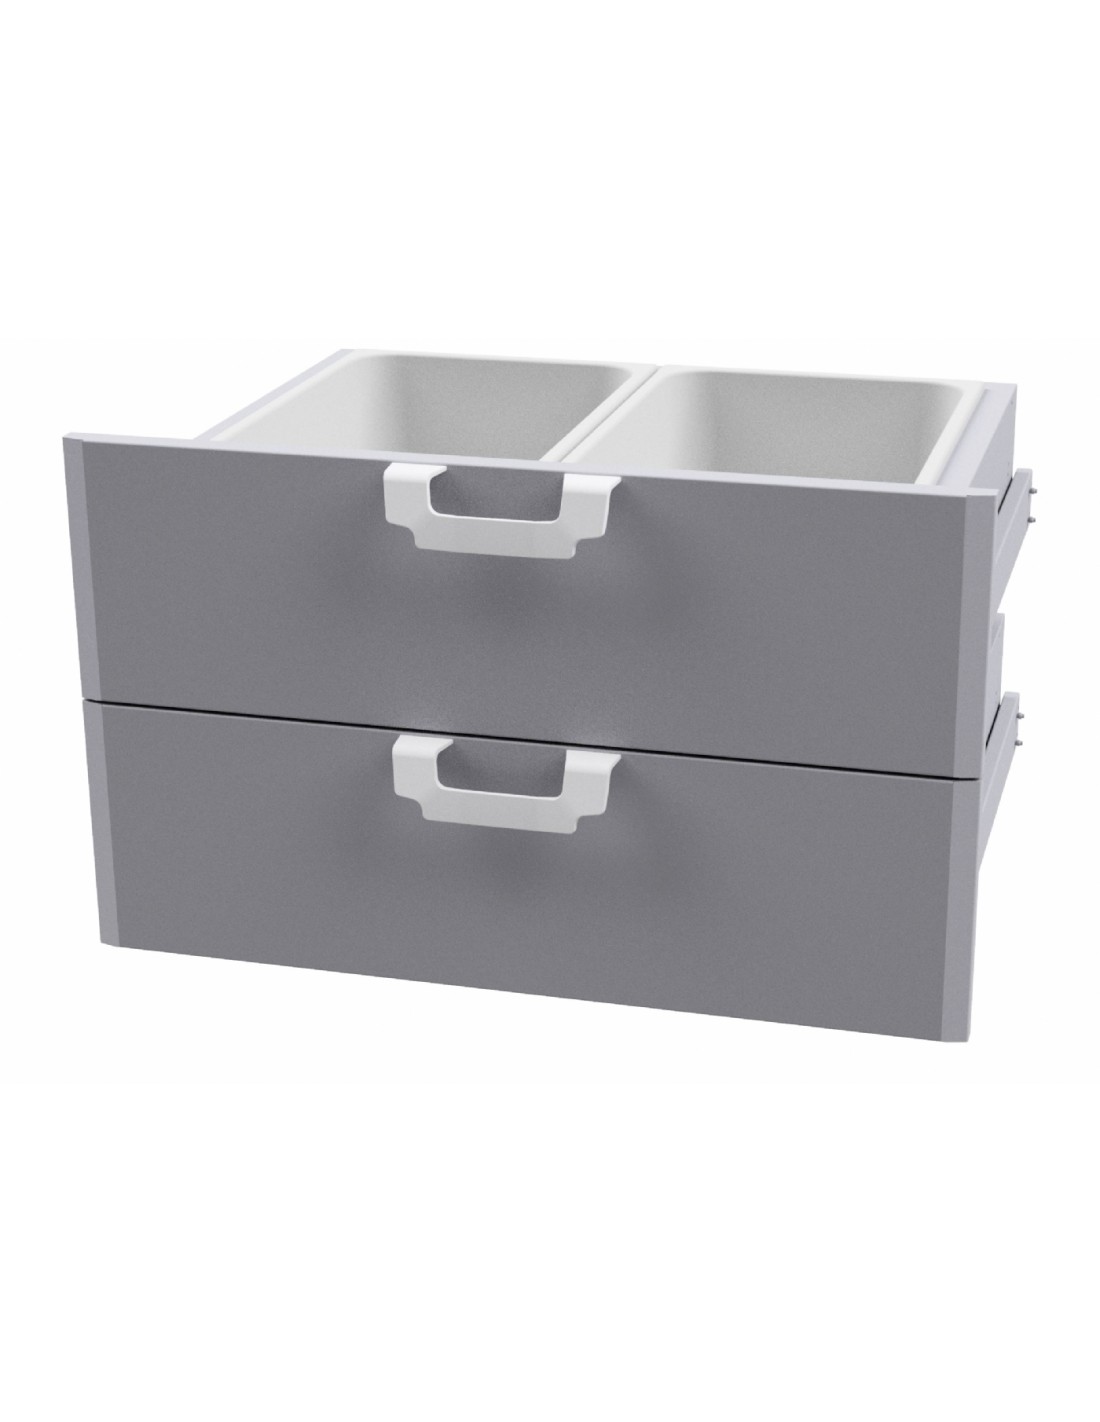 Chest of drawers 800 - N. 2 drawers with 4 plastic containers GN 1/1 15h, telescopic guides. Only on PL-Dimensions cm. 79.5x 59x